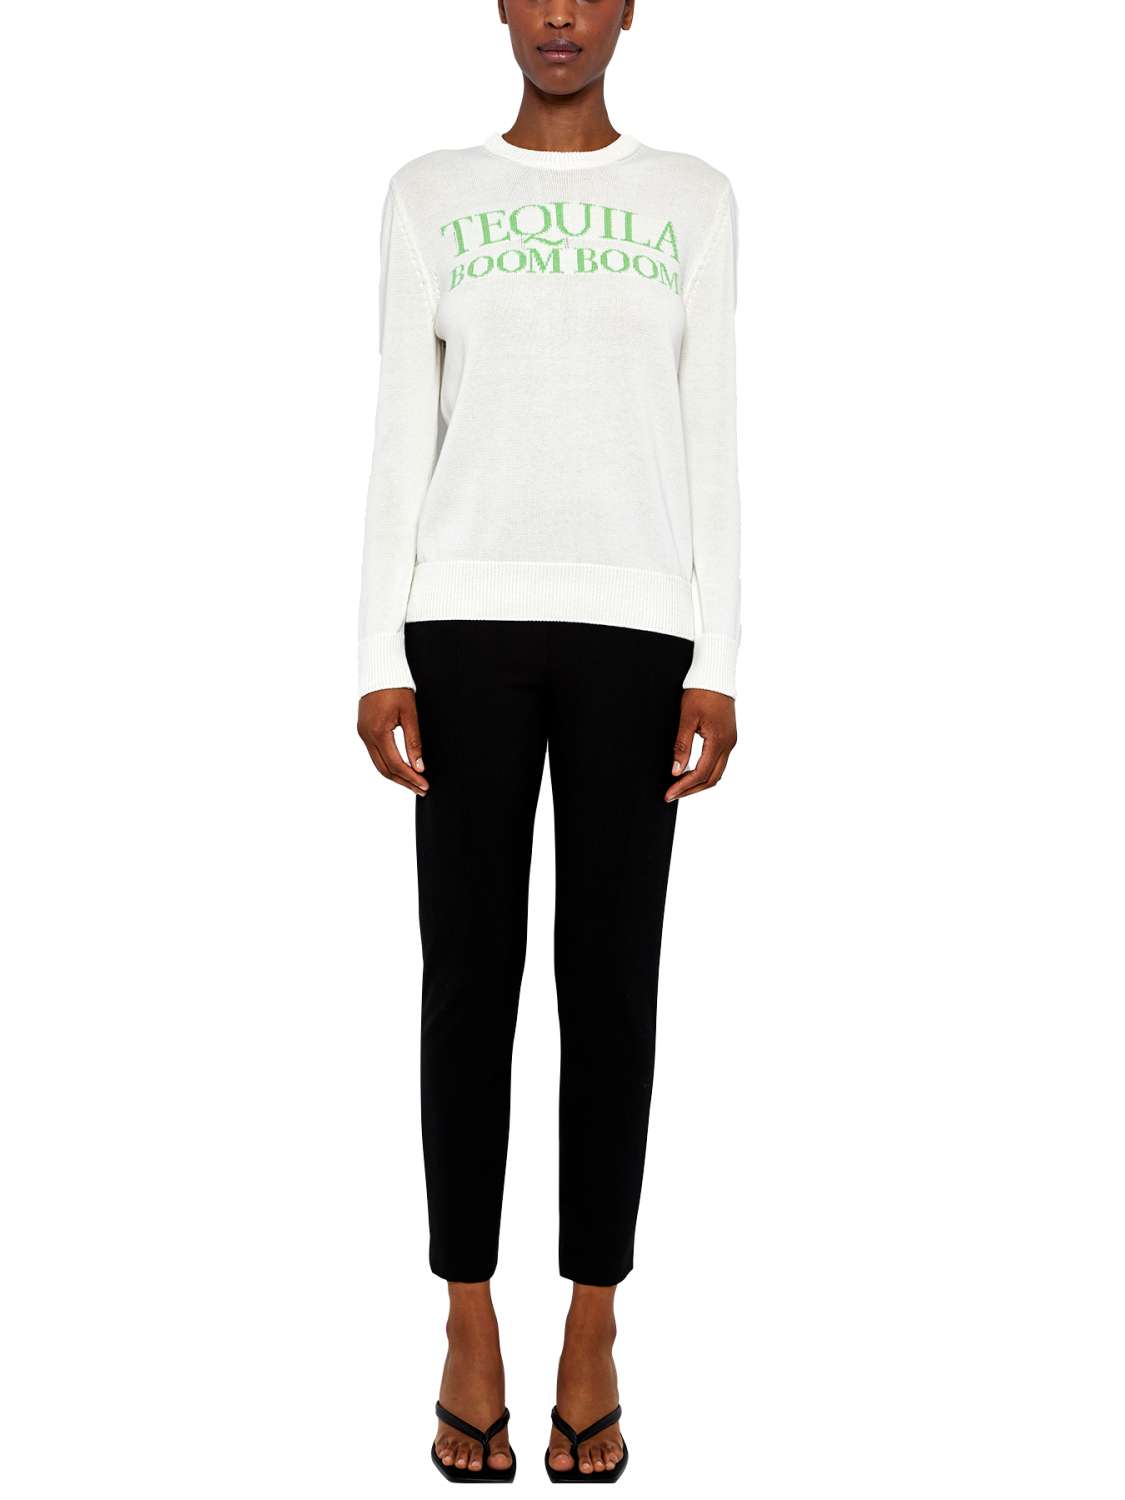 Cocktail Sweater "Tequila"